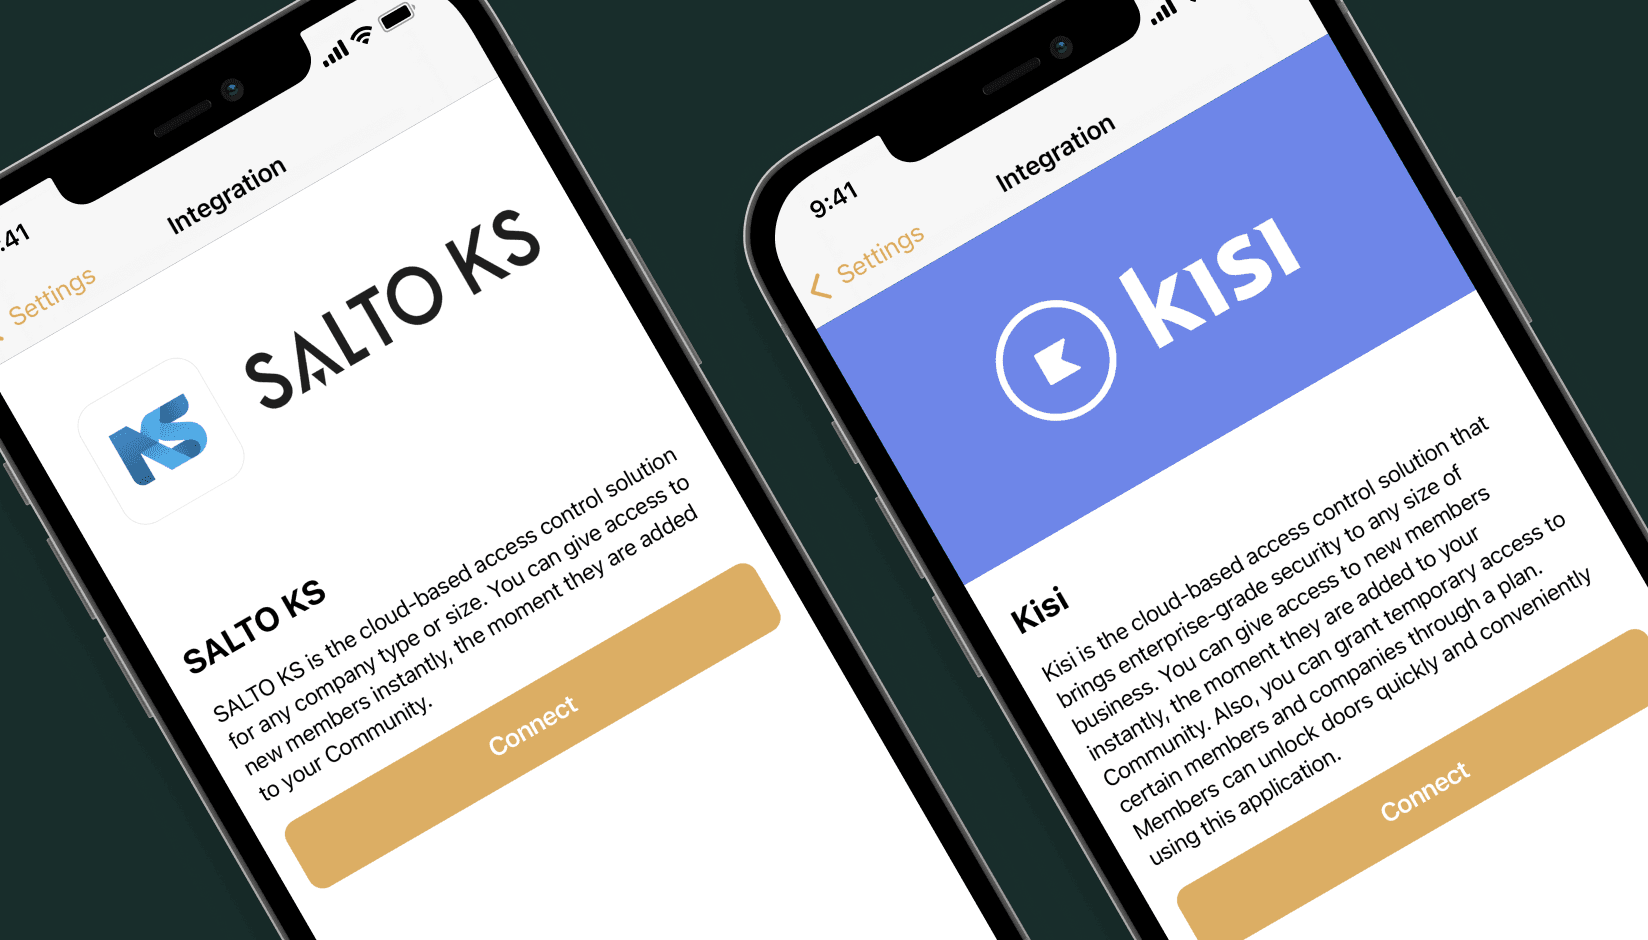 andcards integration with access control systems for coworking spaces: Kisi, Salto KS